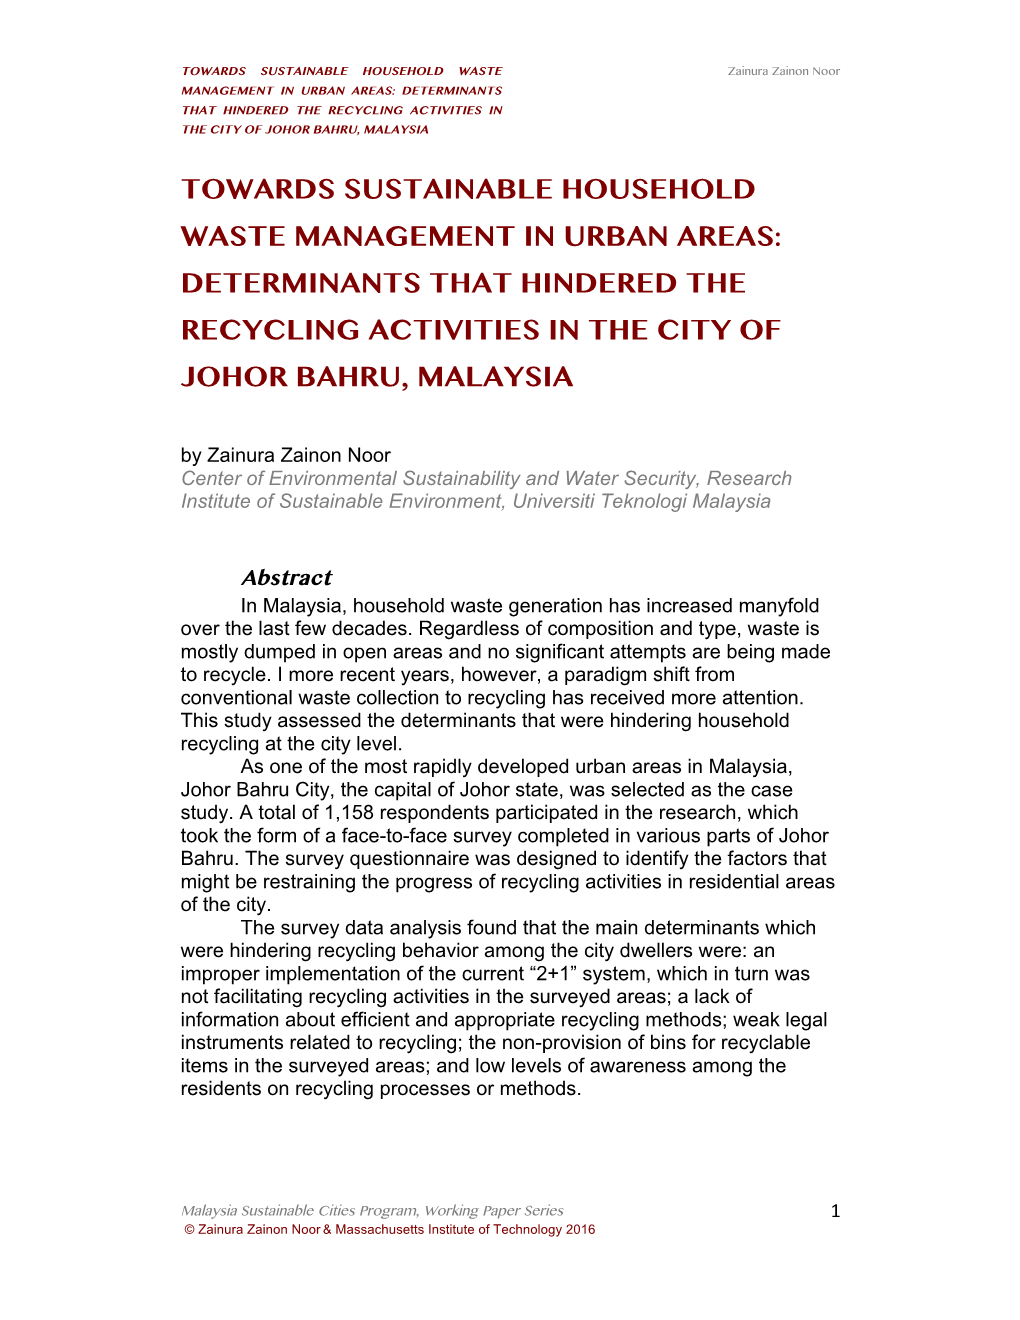 Towards Sustainable Household Waste Management in Urban Areas: Determinants That Hindered the Recycling Activities in the City of Johor Bahru, Malaysia